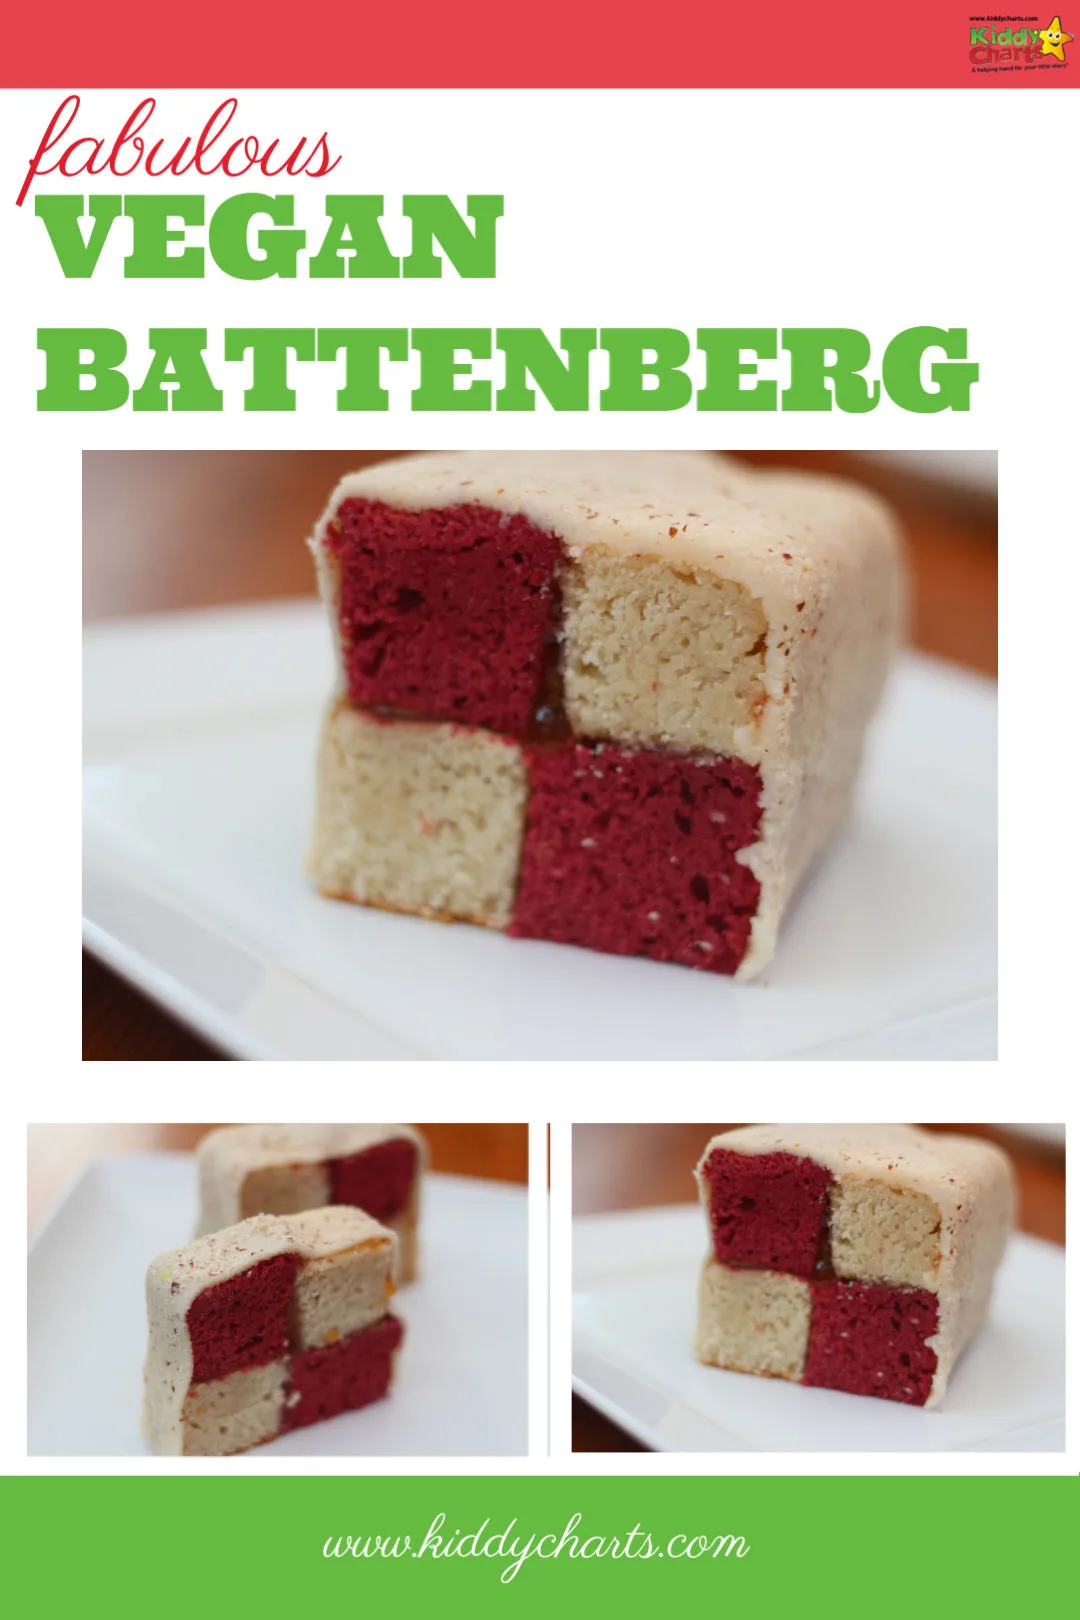 Are you after a vegan battenberg cake? Then this one with Beetroot and Coconut will be perfect for you. Go check it out! #vegan #veganrecipes #vegancakes #battenberg